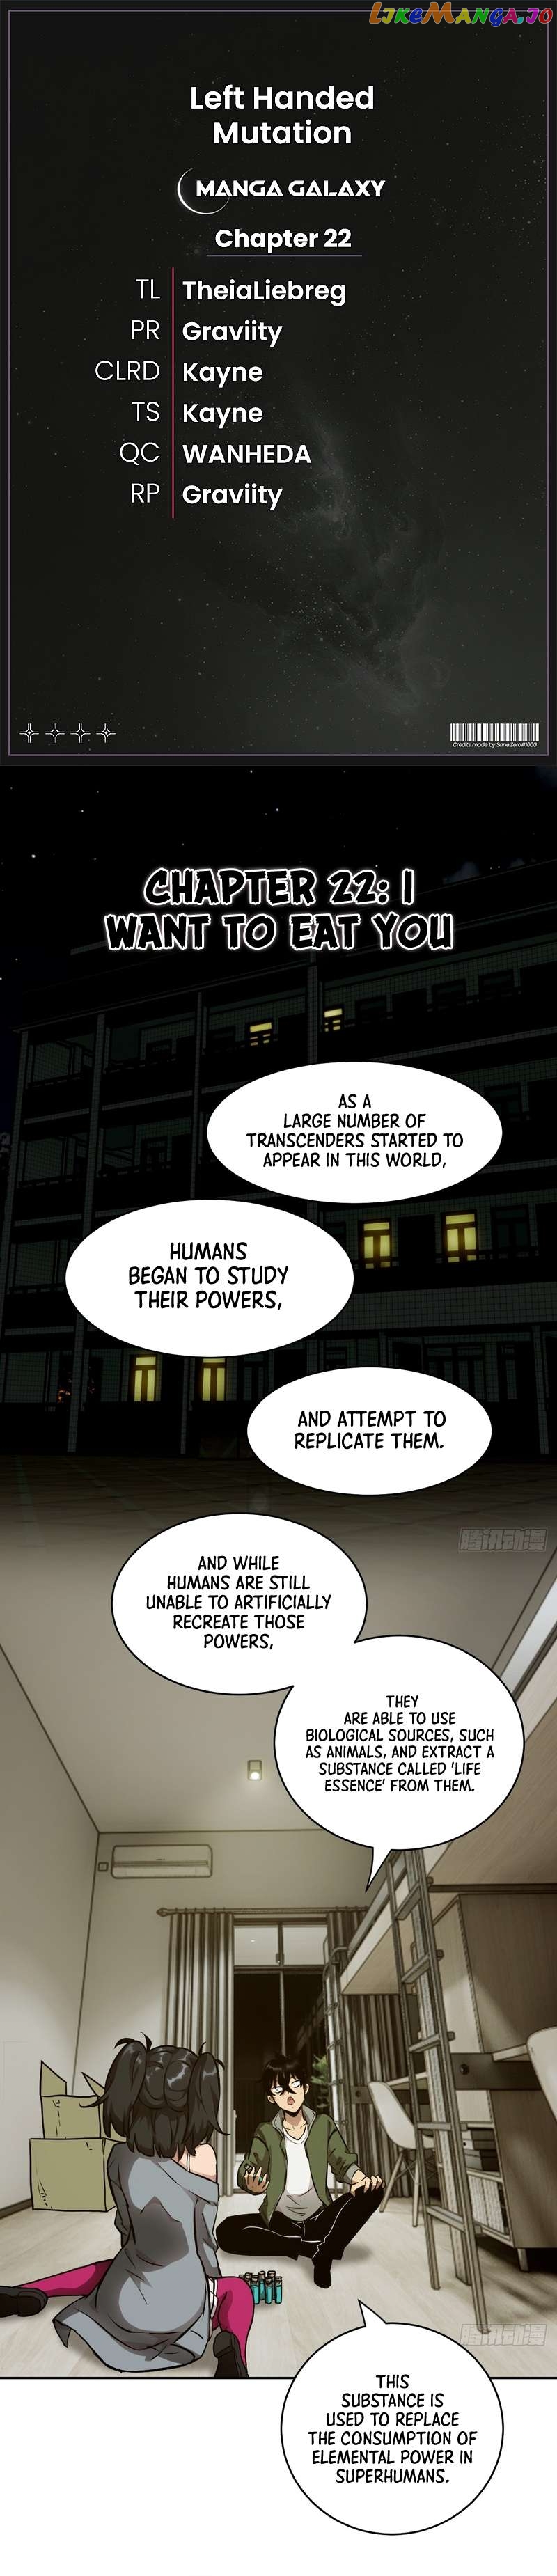 Left Handed Mutation Chapter 22 - page 1